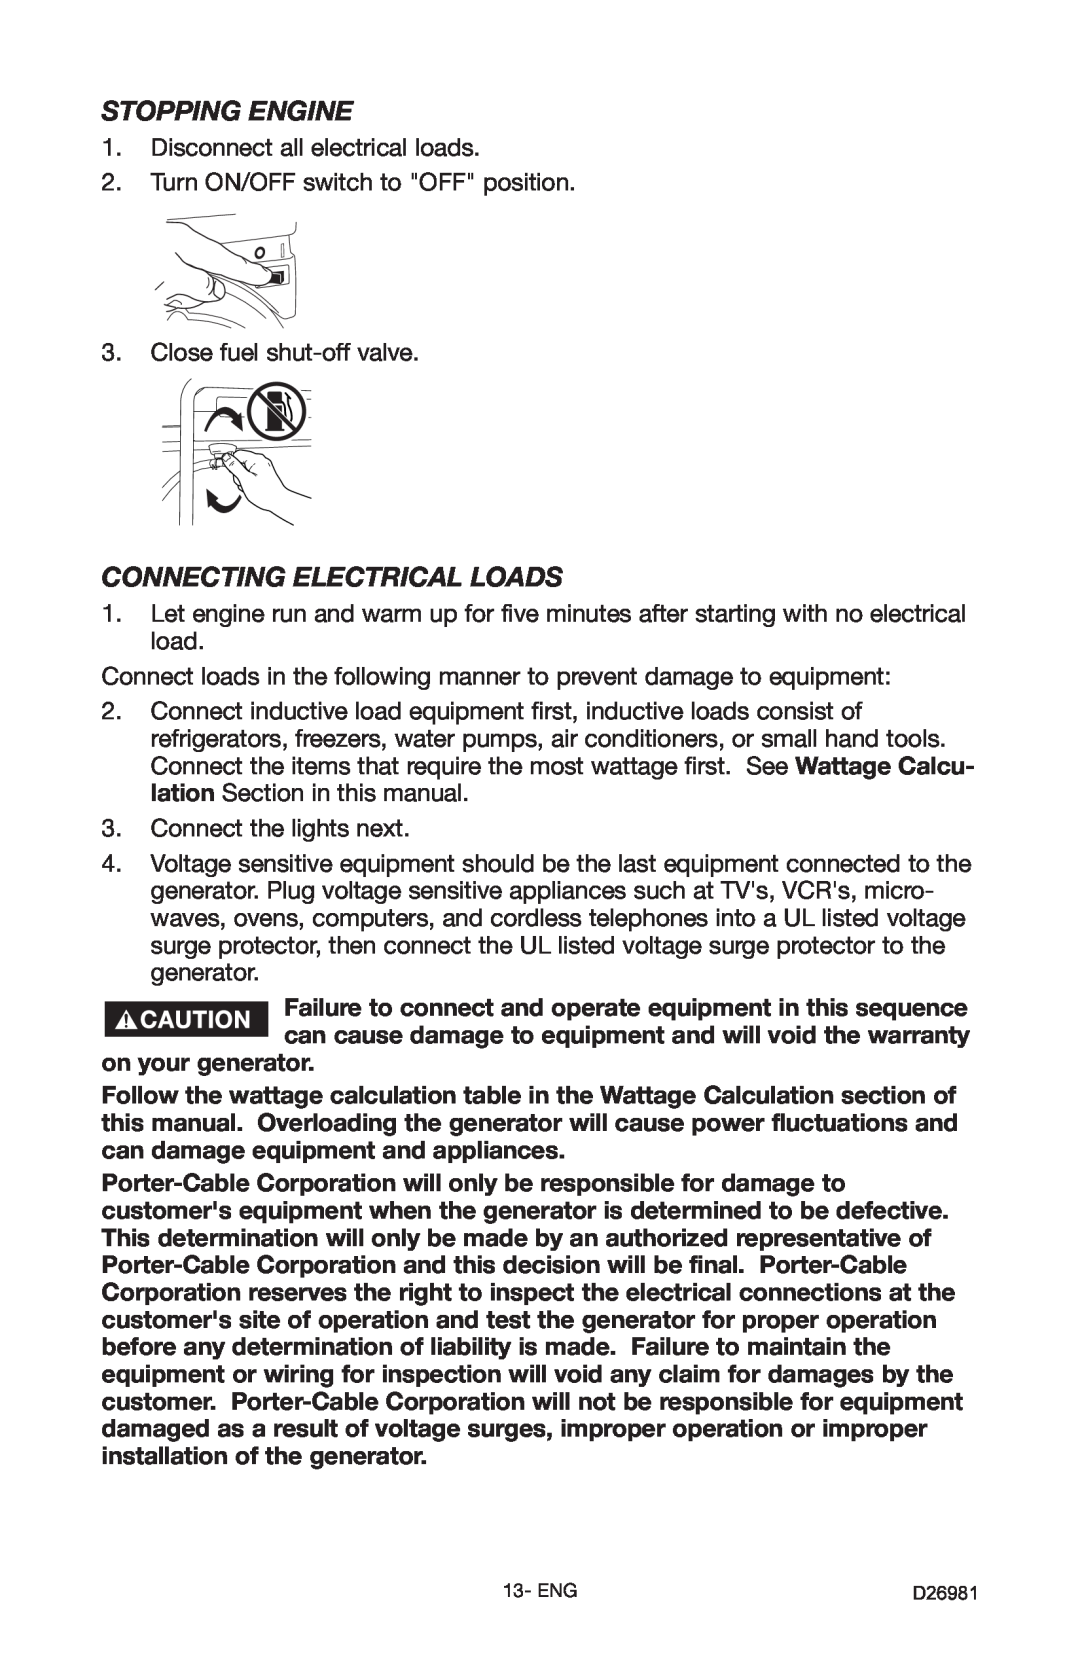 Porter-Cable D26981-028-0 instruction manual Stopping Engine, Connecting Electrical Loads 